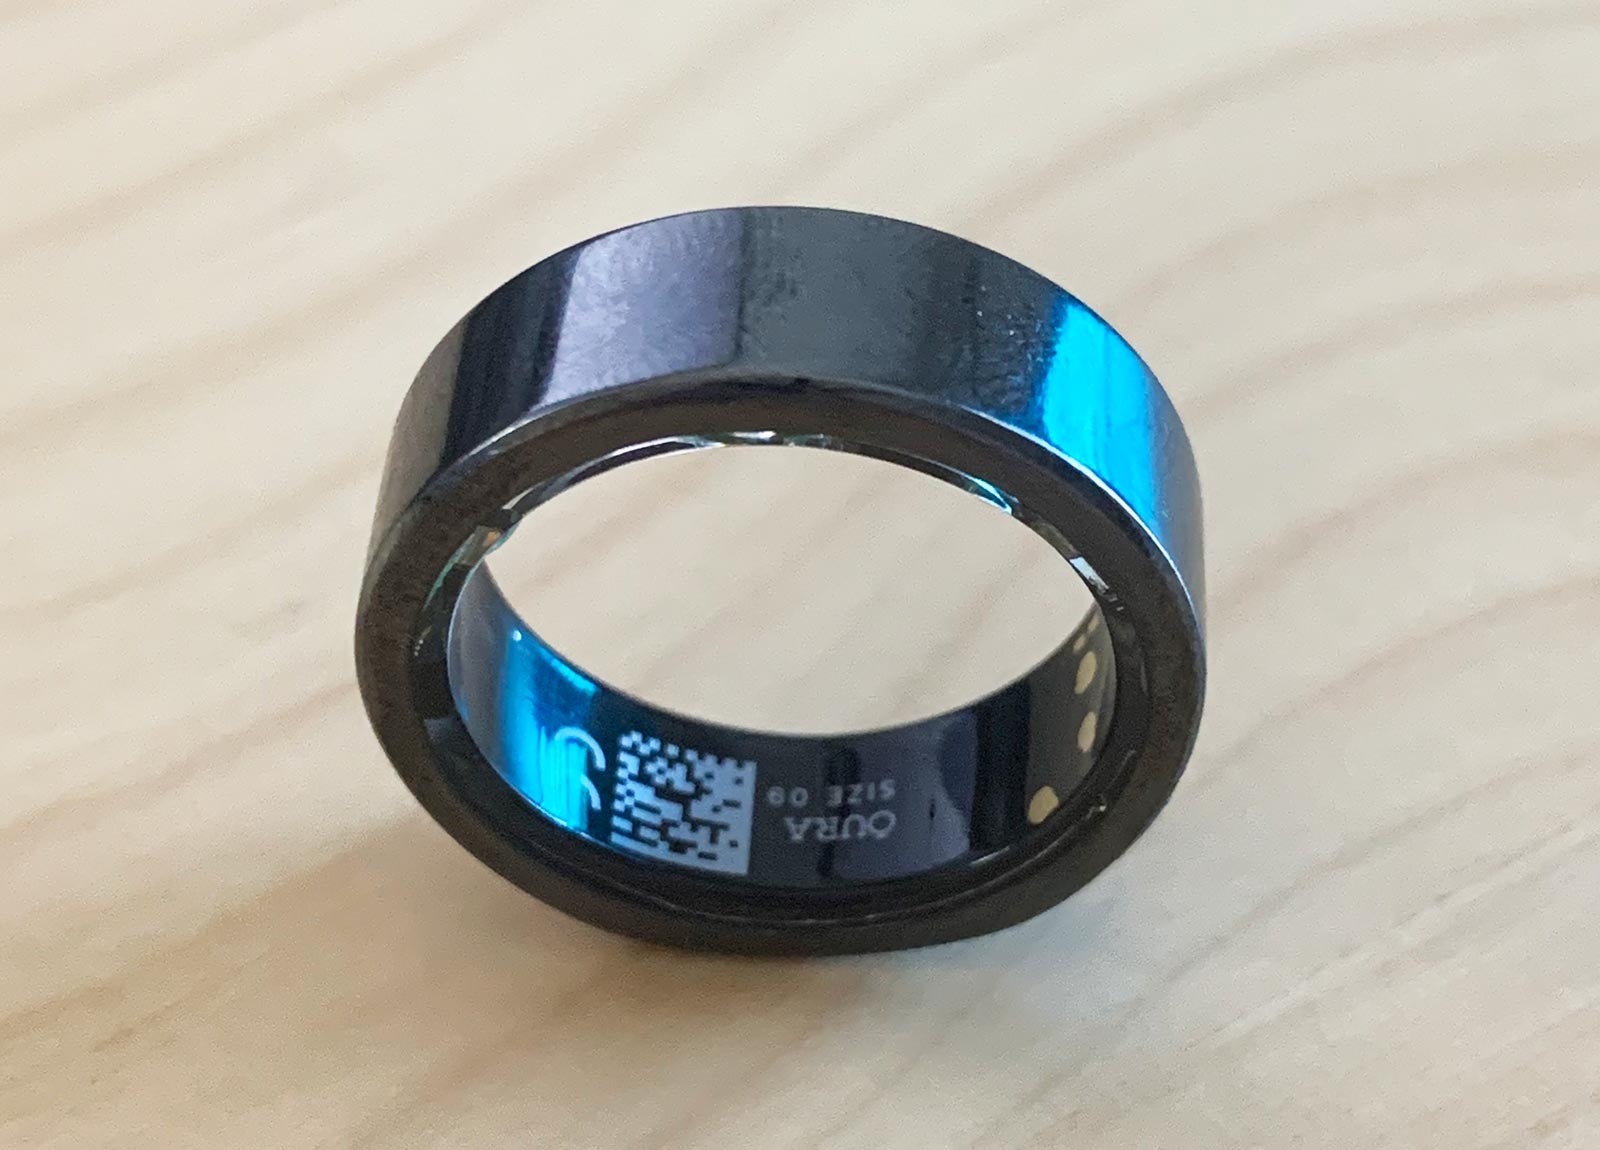 Is it worth replacing a Oura Ring Issues battery?